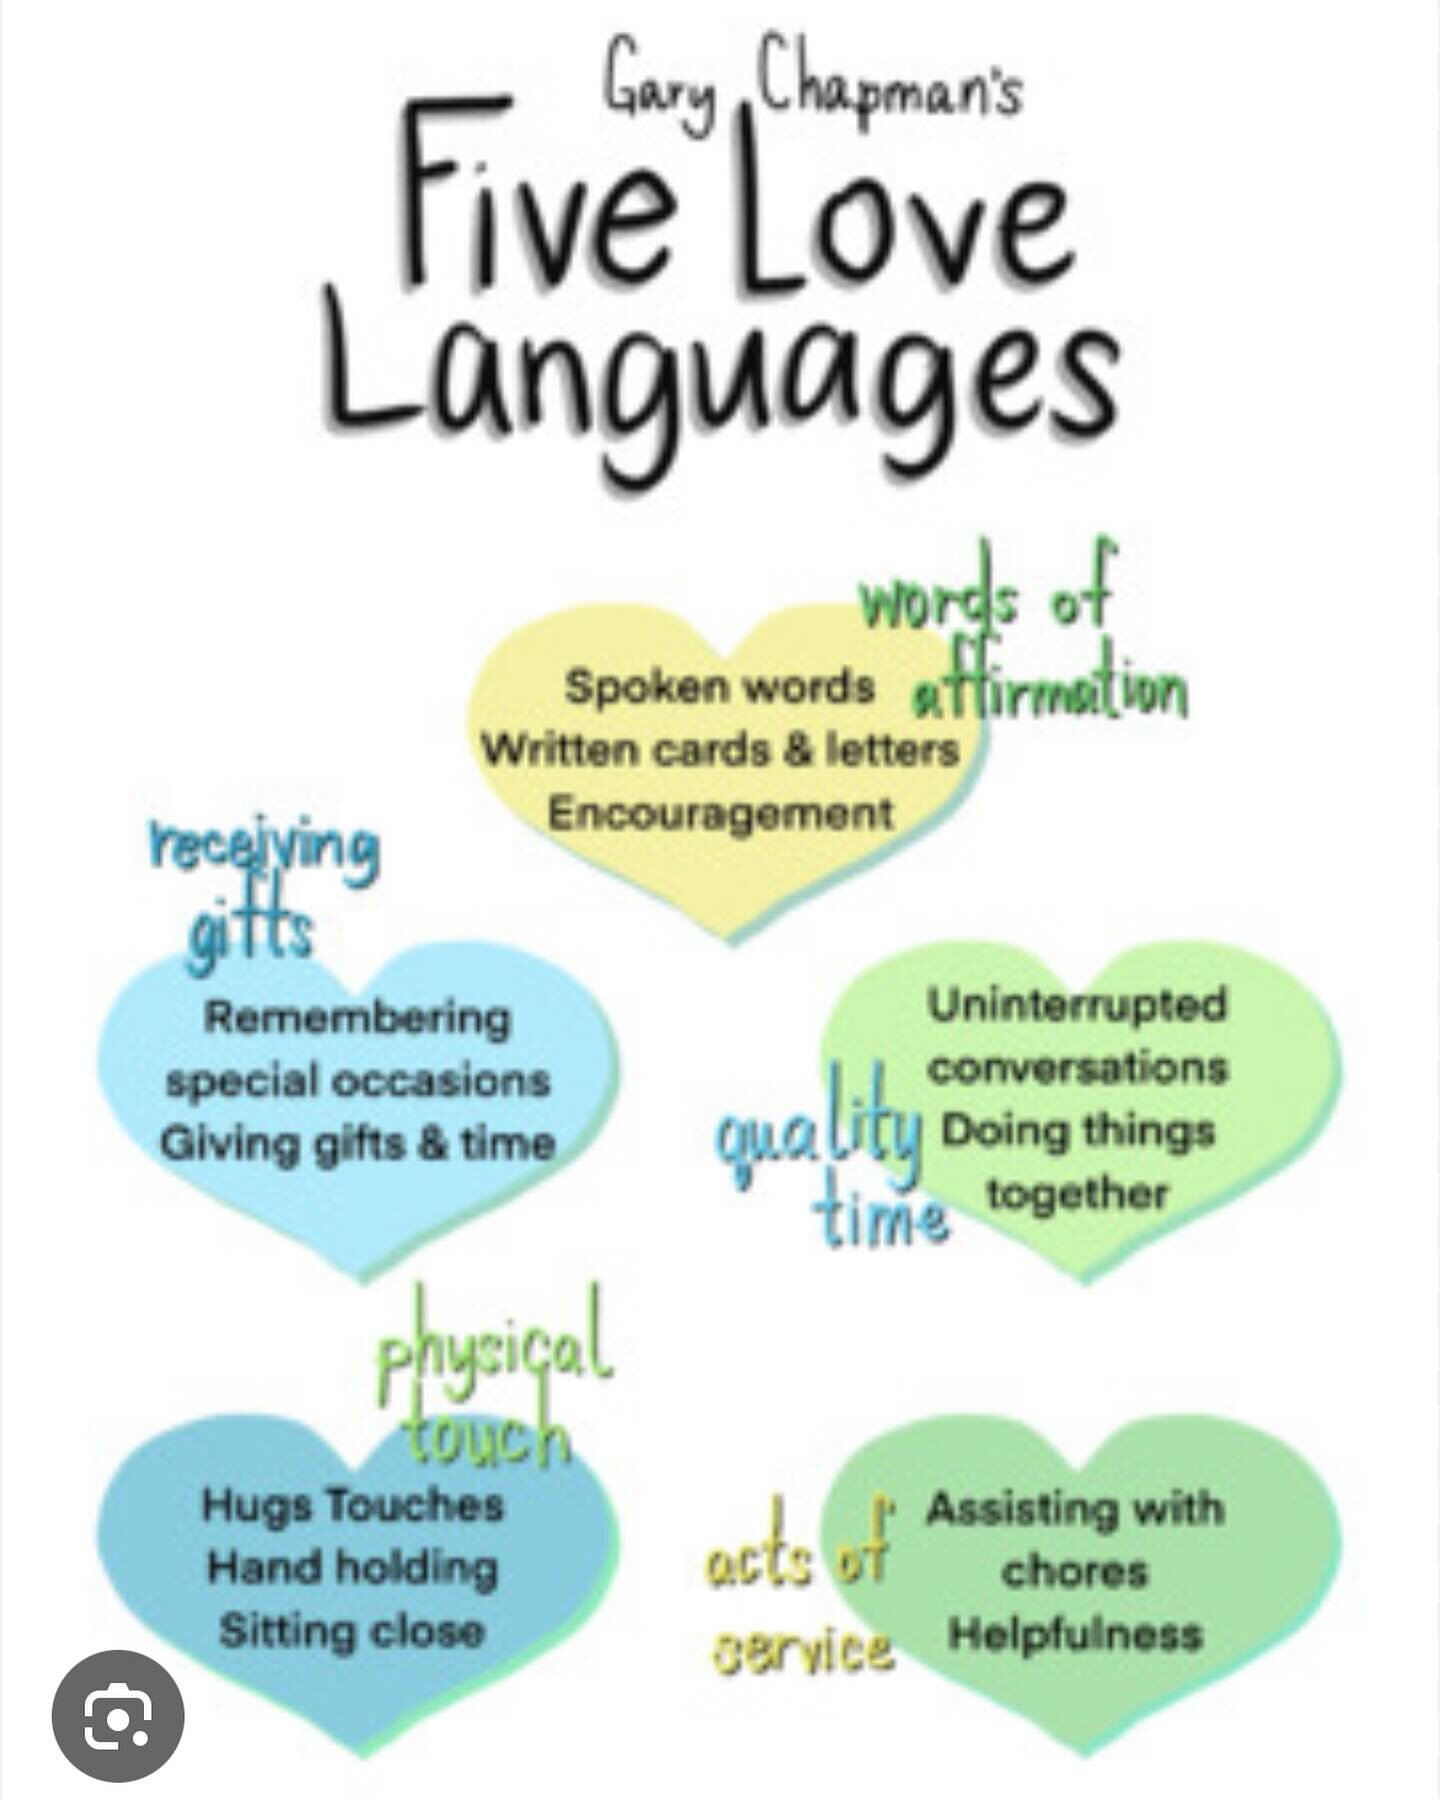 What are your live languages? I&rsquo;ll share mine in comments.